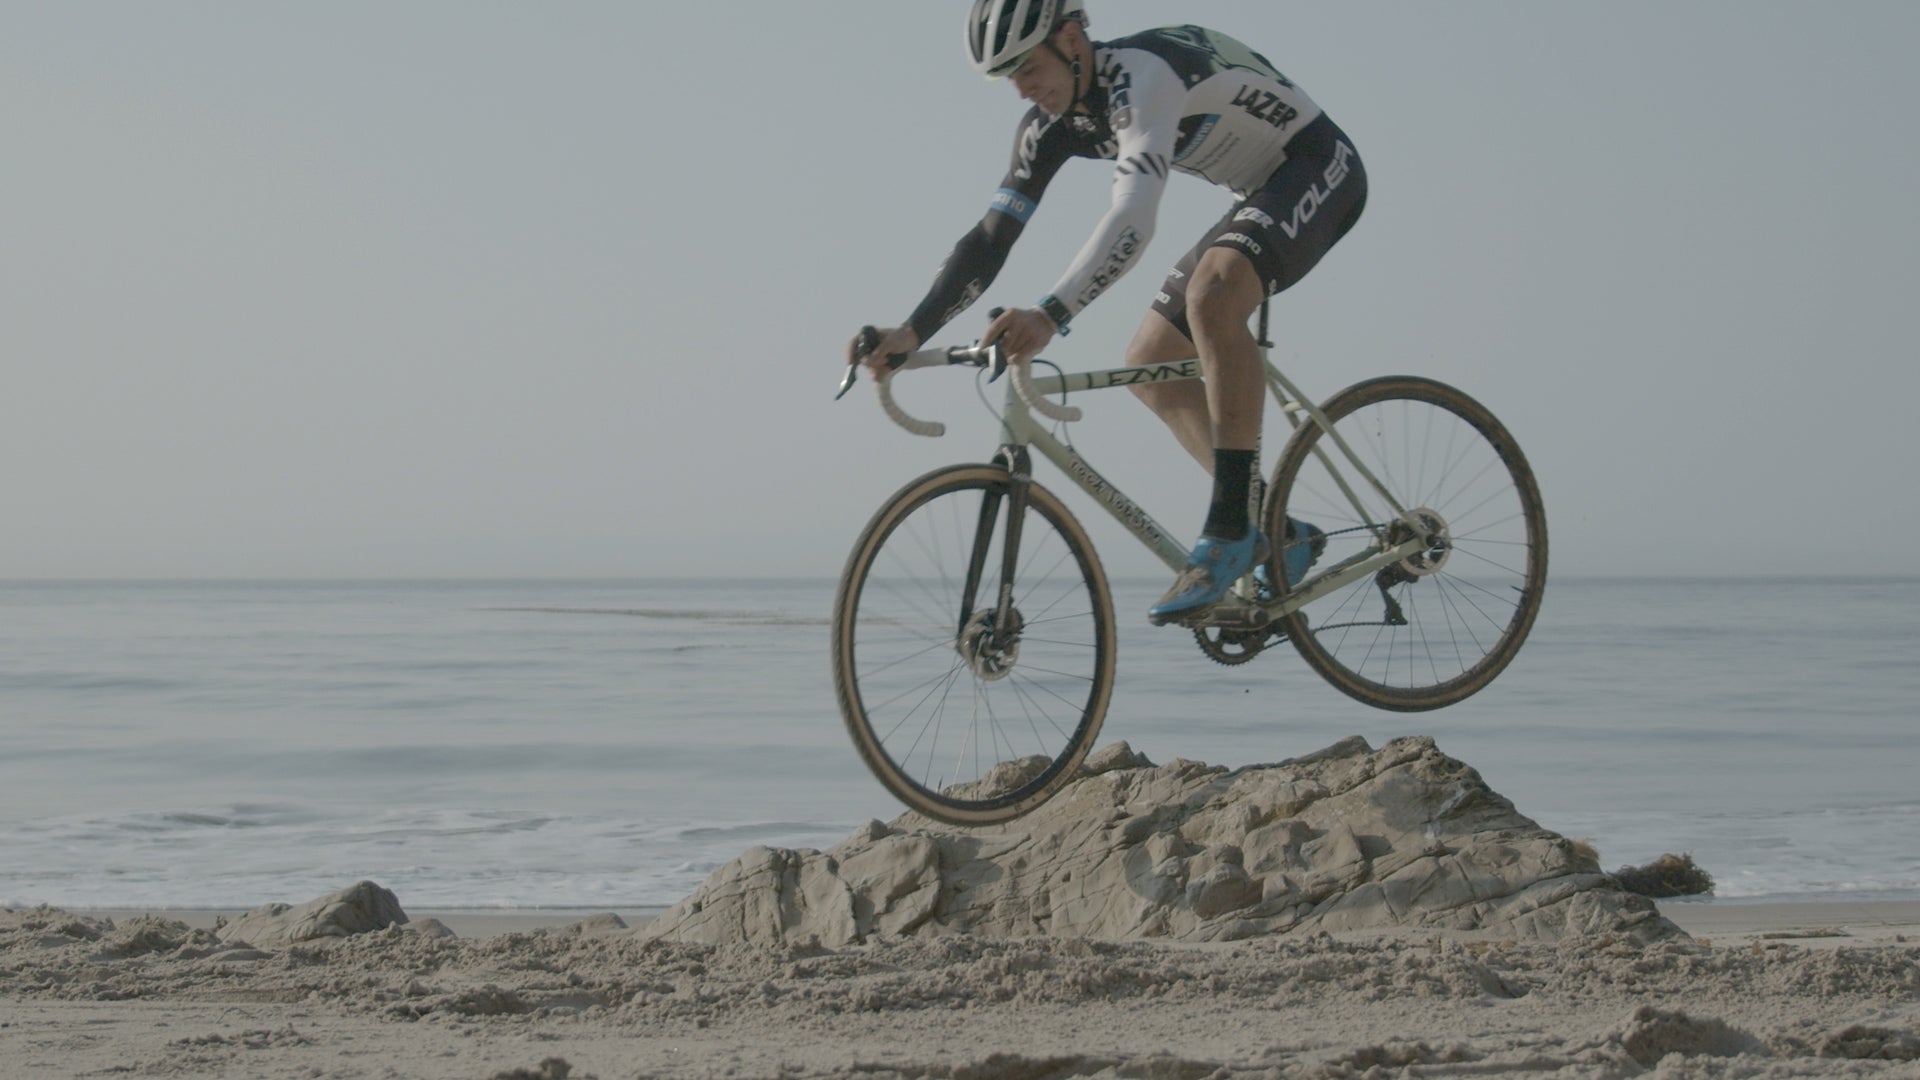 Andrew Juiliano TIdes: A Sandy Cycling Ode